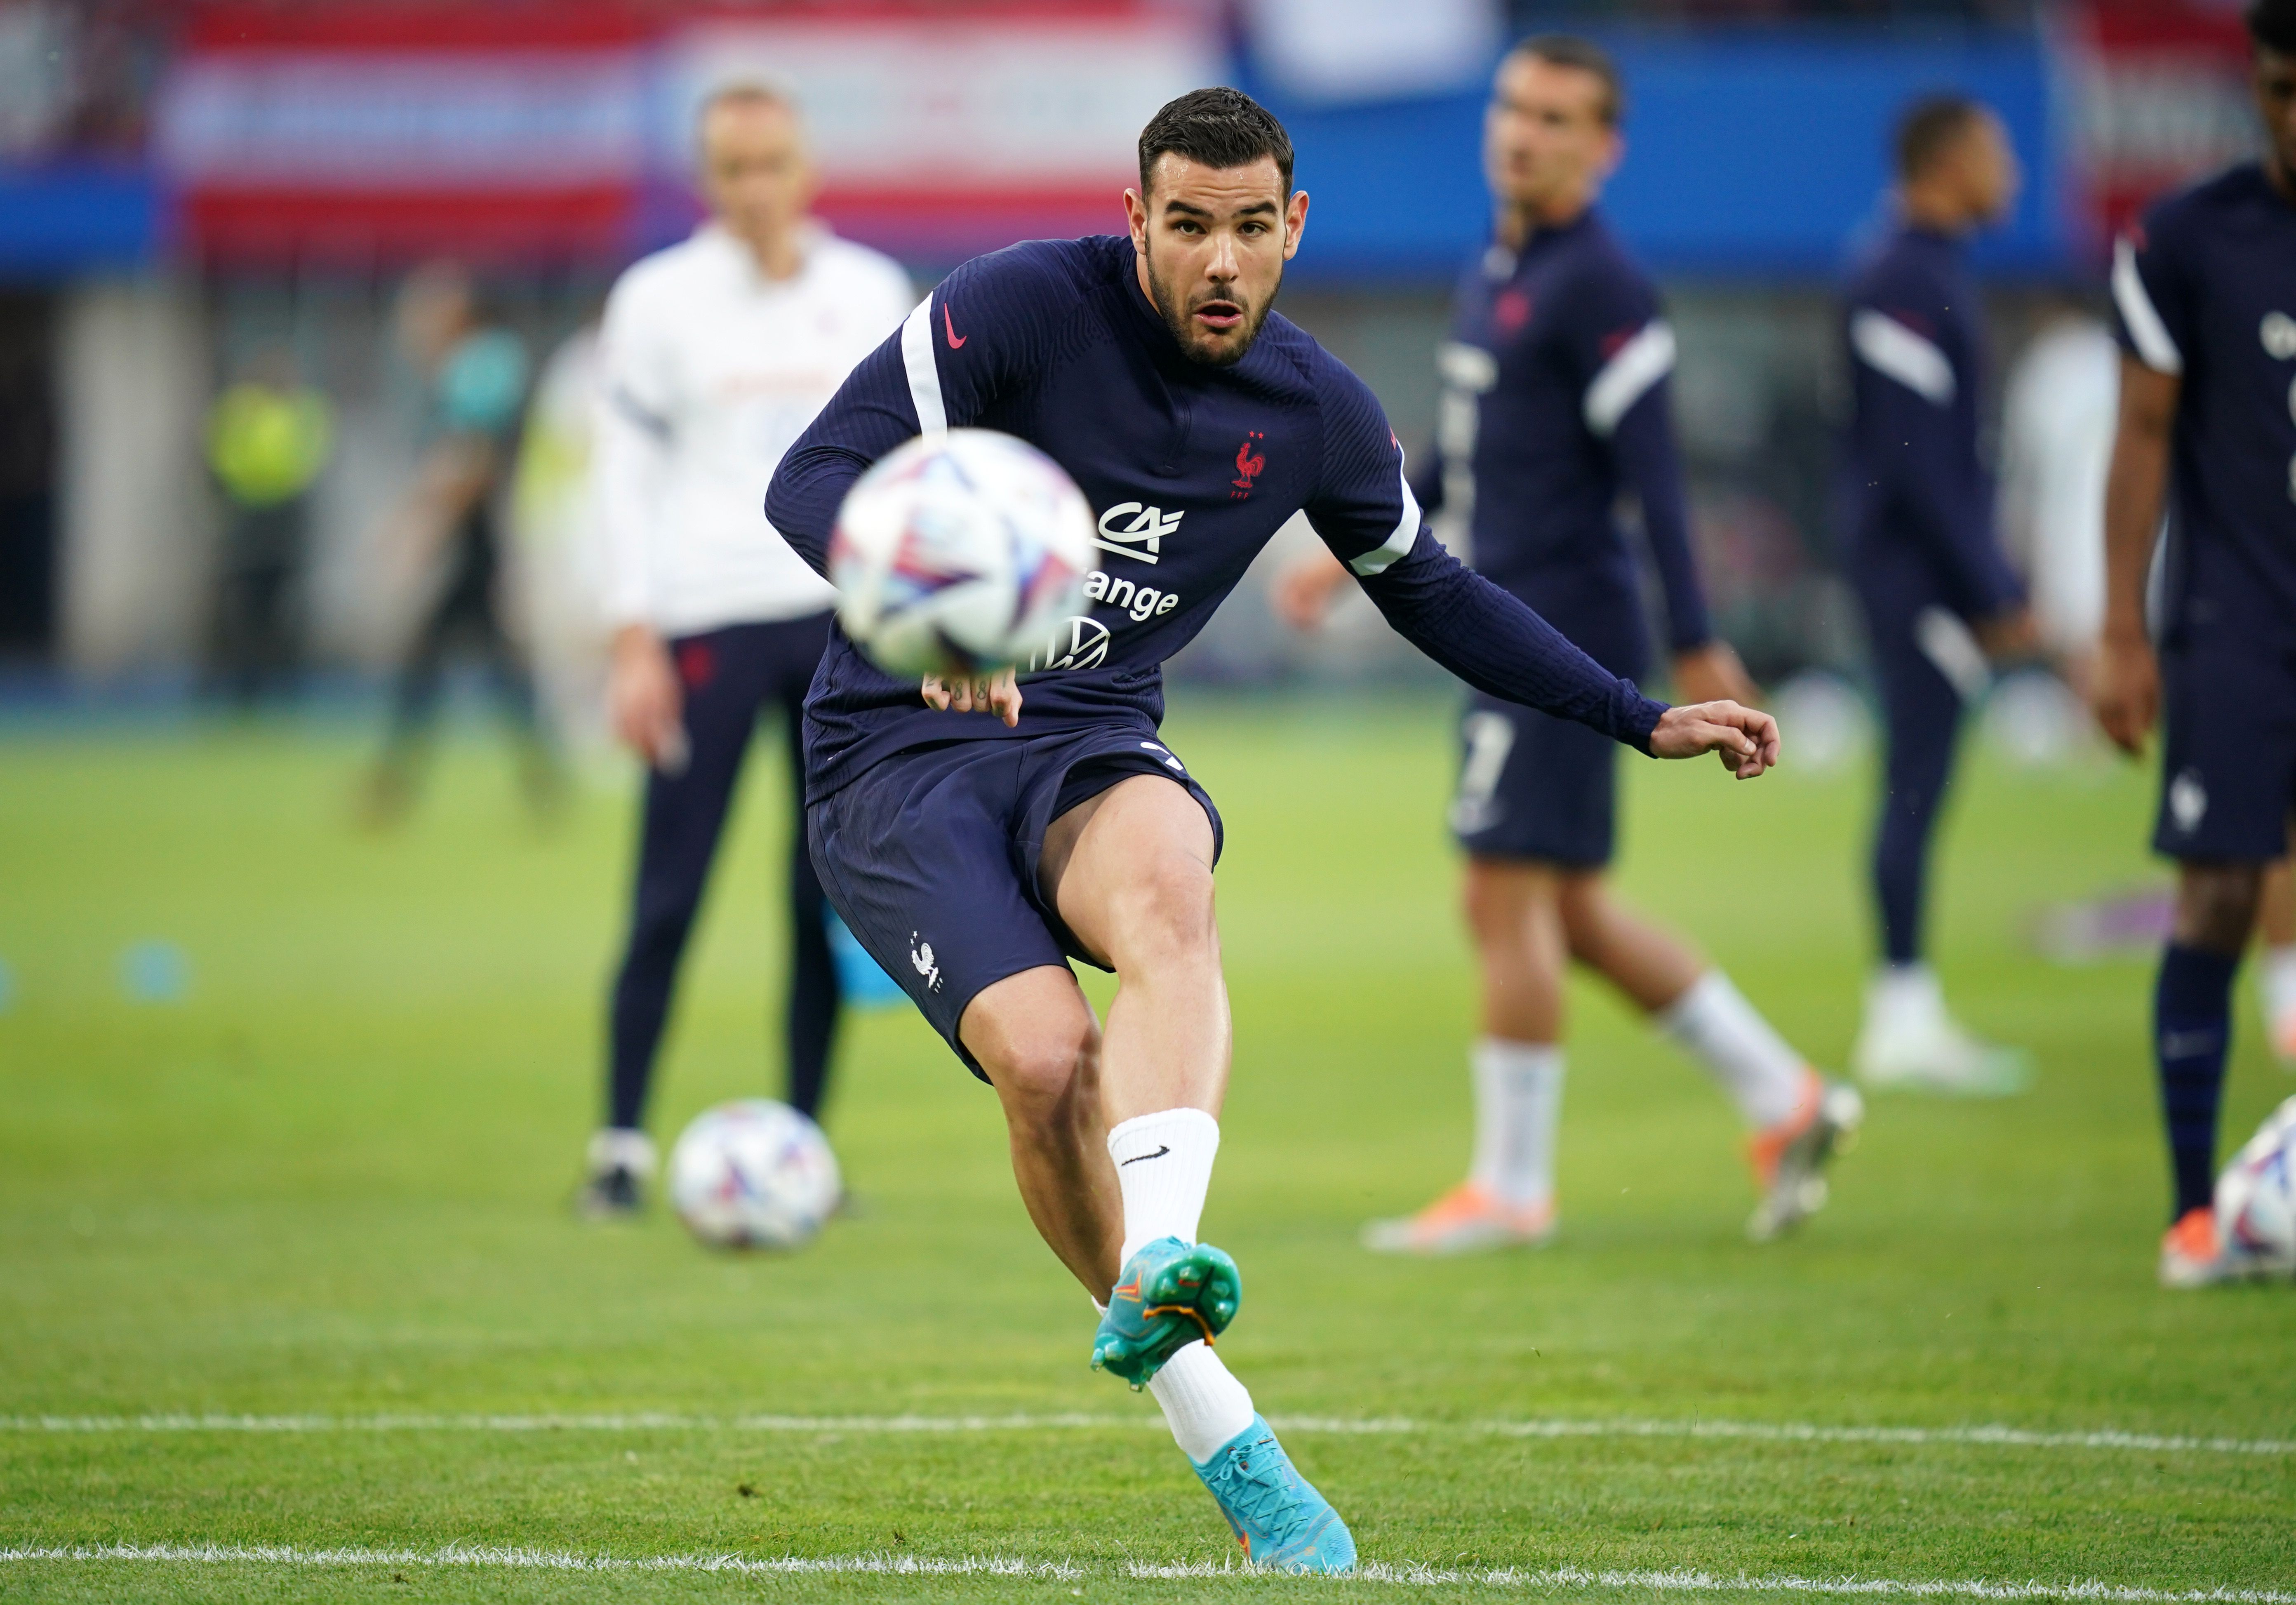 Theo Hernandez of France warms up prior to the UEFA Nations League - League A Group 1 match between Austria and France at Ernst Happel Stadion on June 10, 2022 in Vienna, Austria